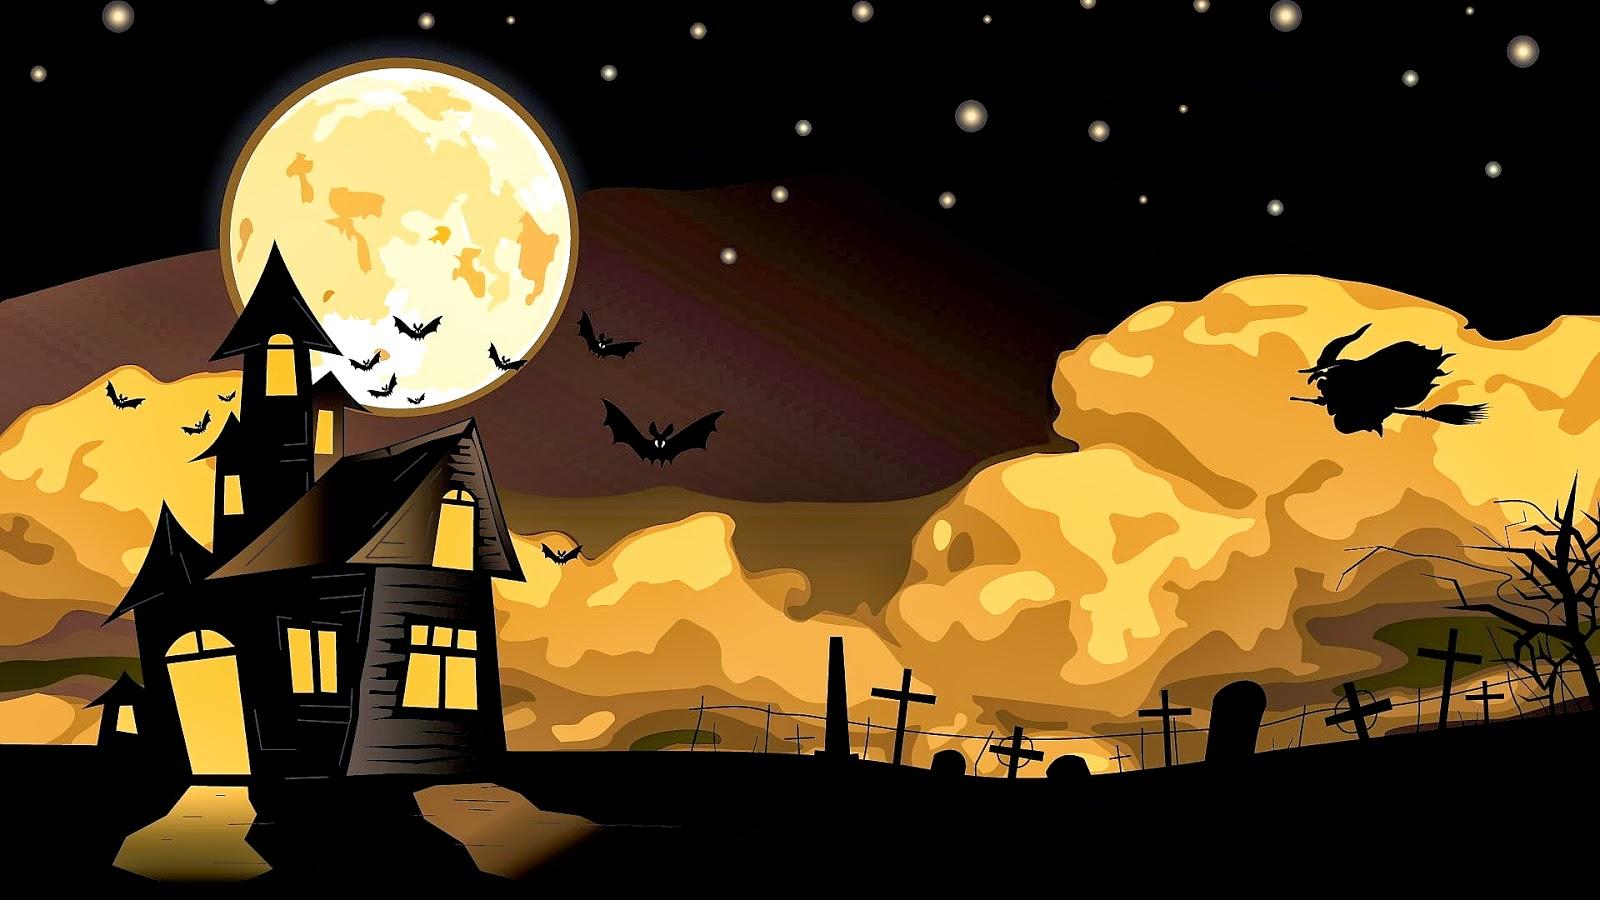 HD Wallpaper: Halloween Night House Witch